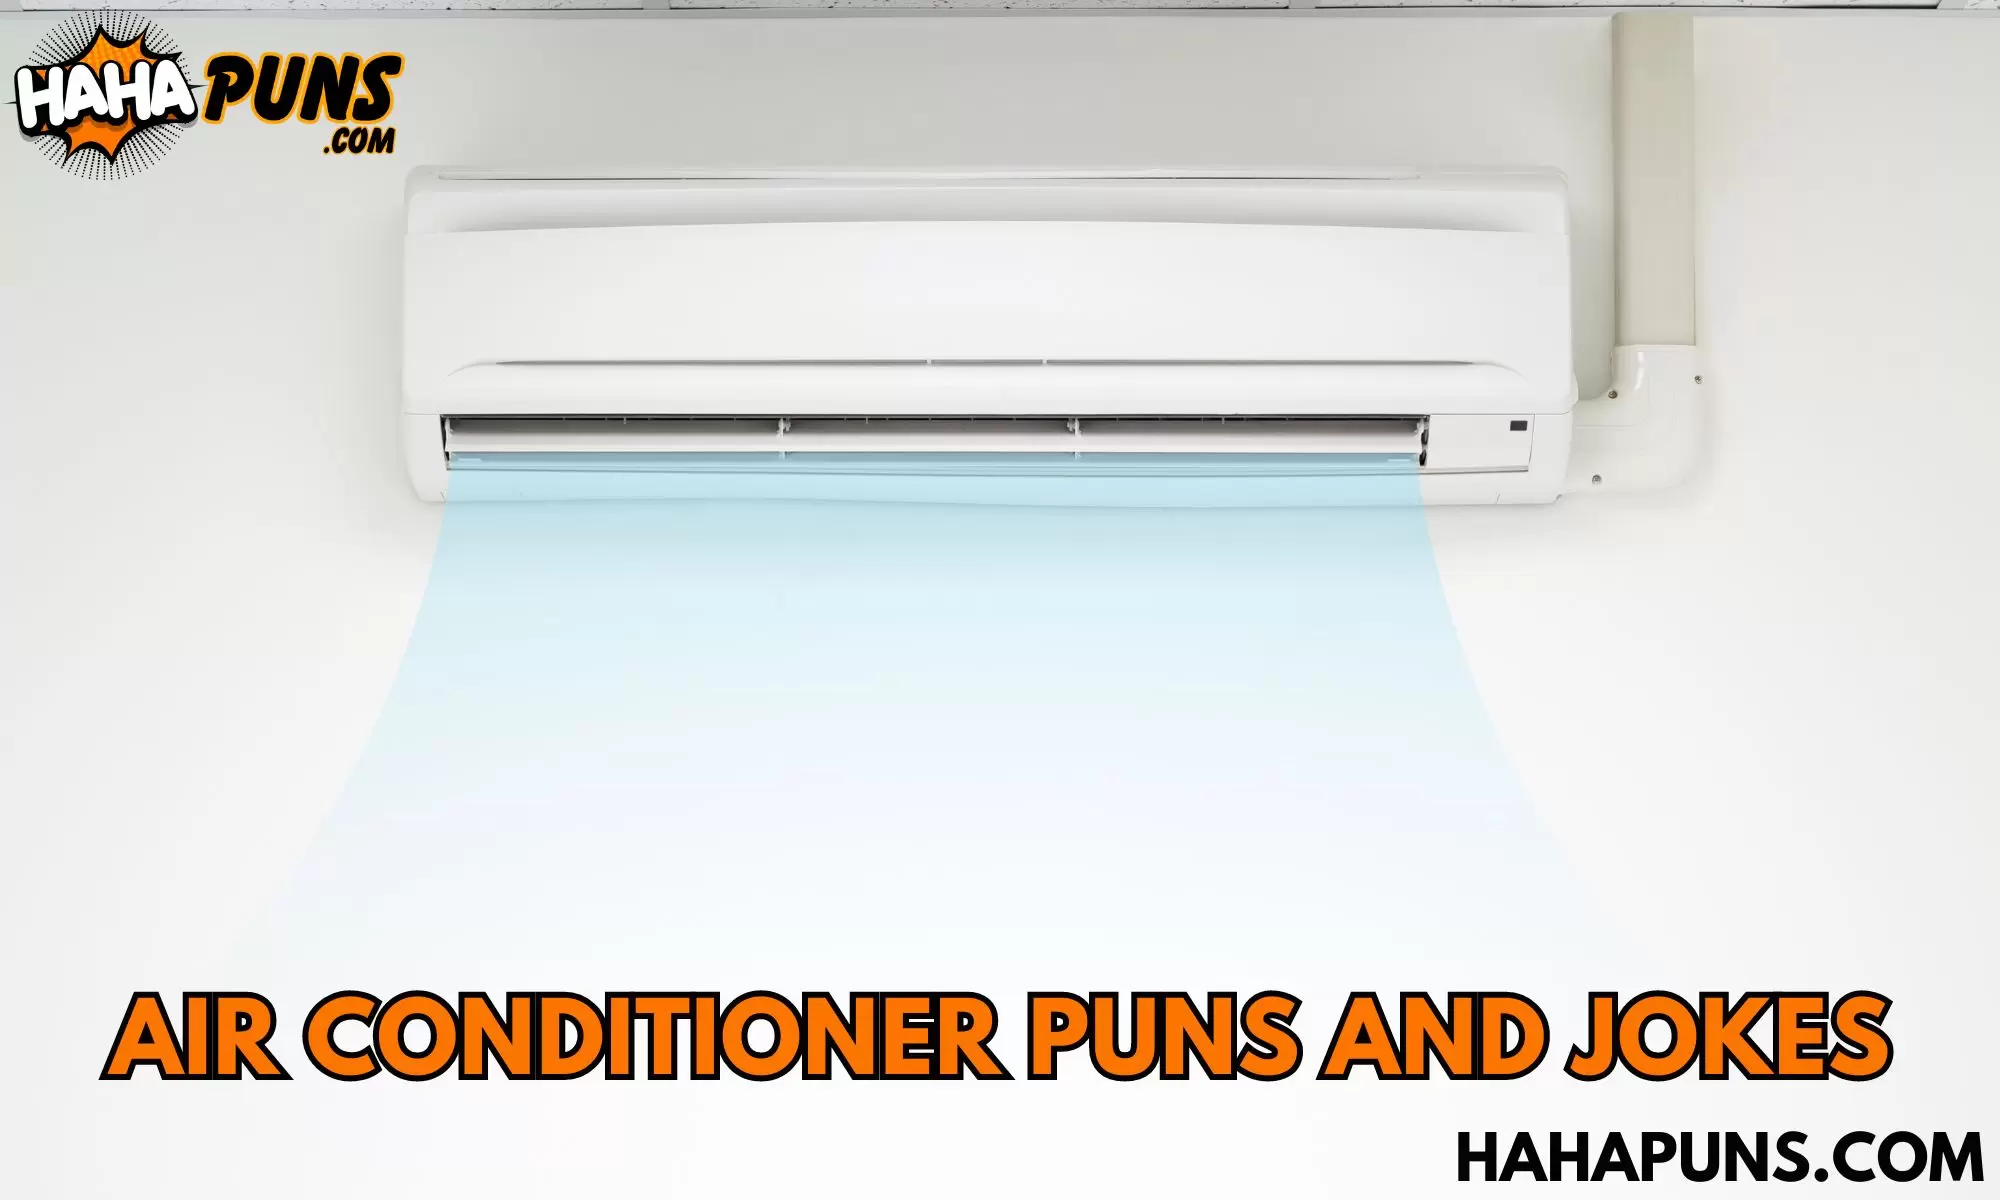 Air Conditioner Puns And Jokes